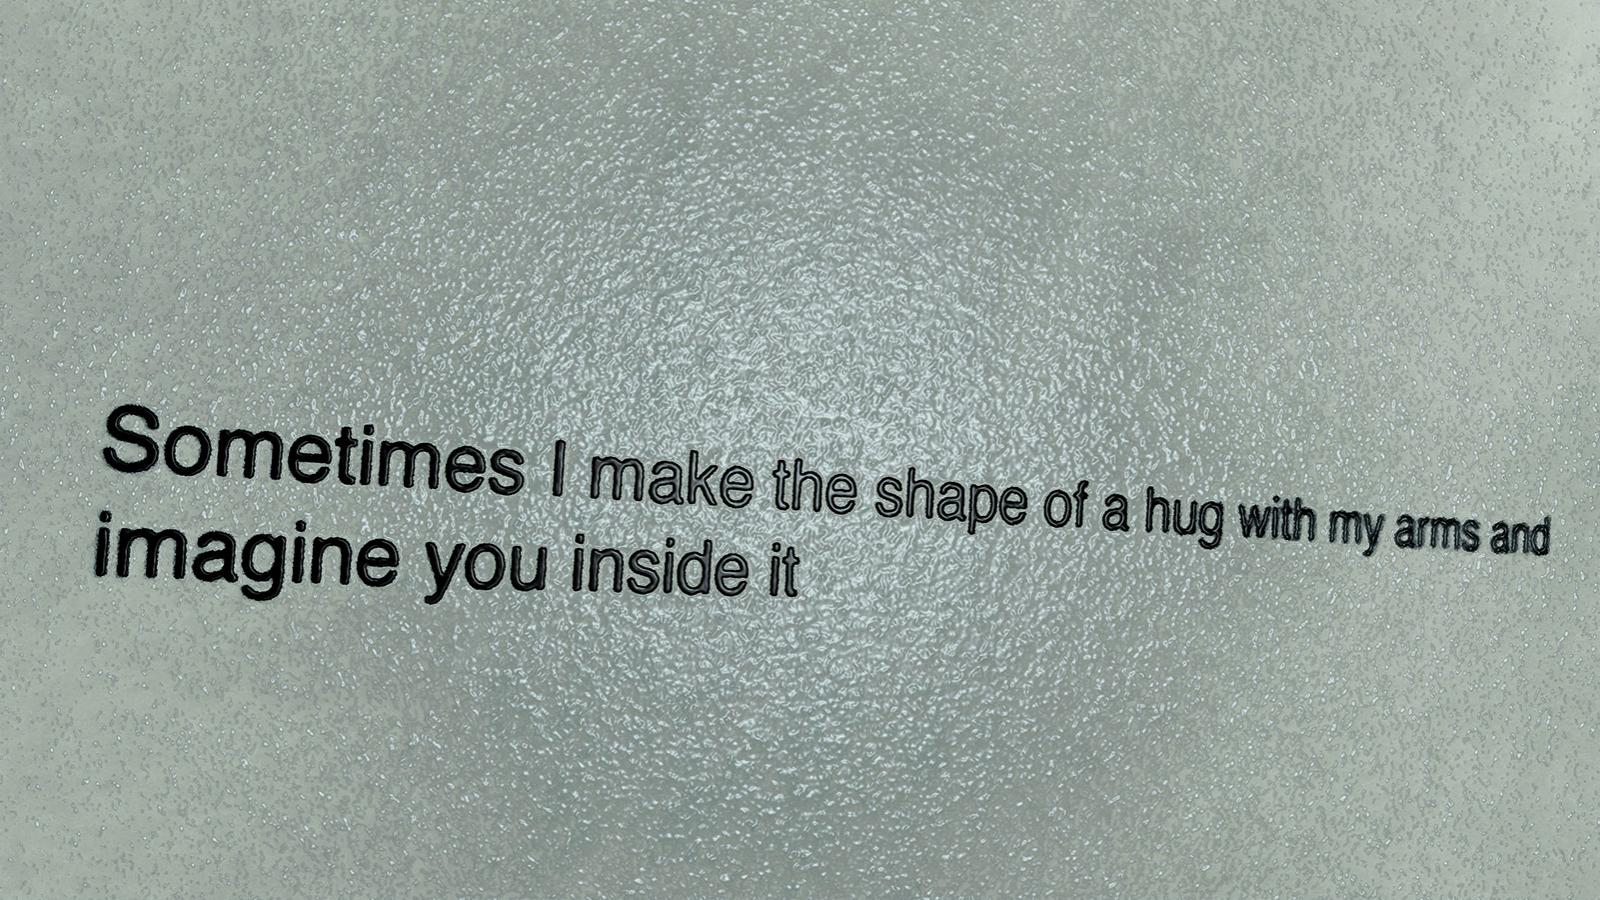 Black text on a bumpy grey background reads "Sometimes I make the shape of a hug with my arms and imagine you inside it"